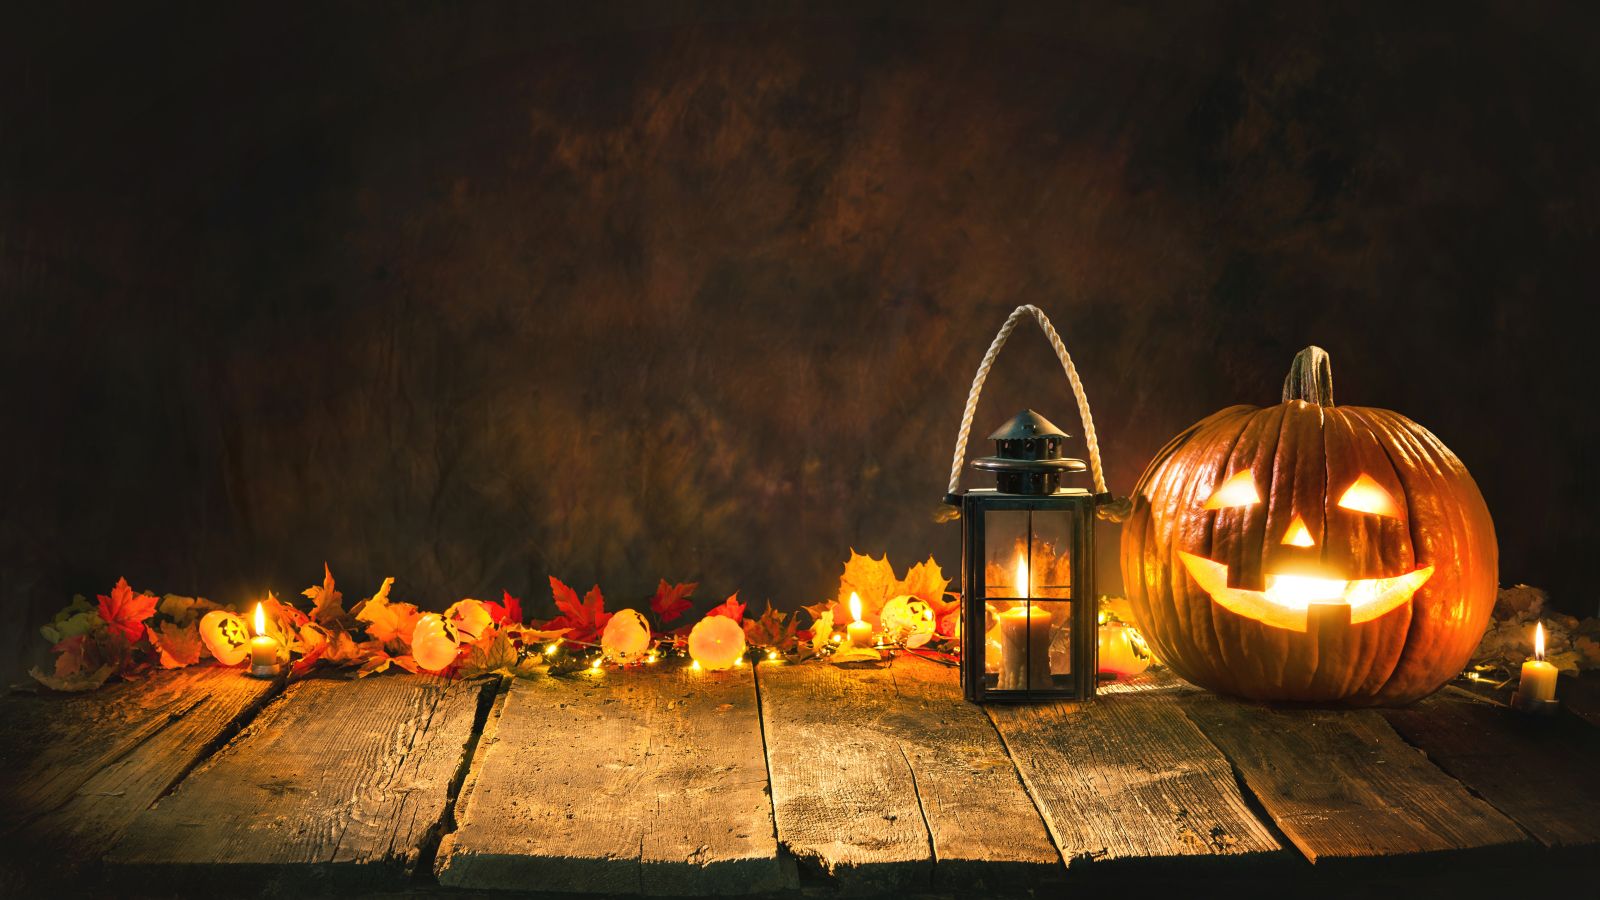 Halloween 1600x900 Resolution Wallpaper, HD Holidays 4K Wallpaper, Image, Photo and Background